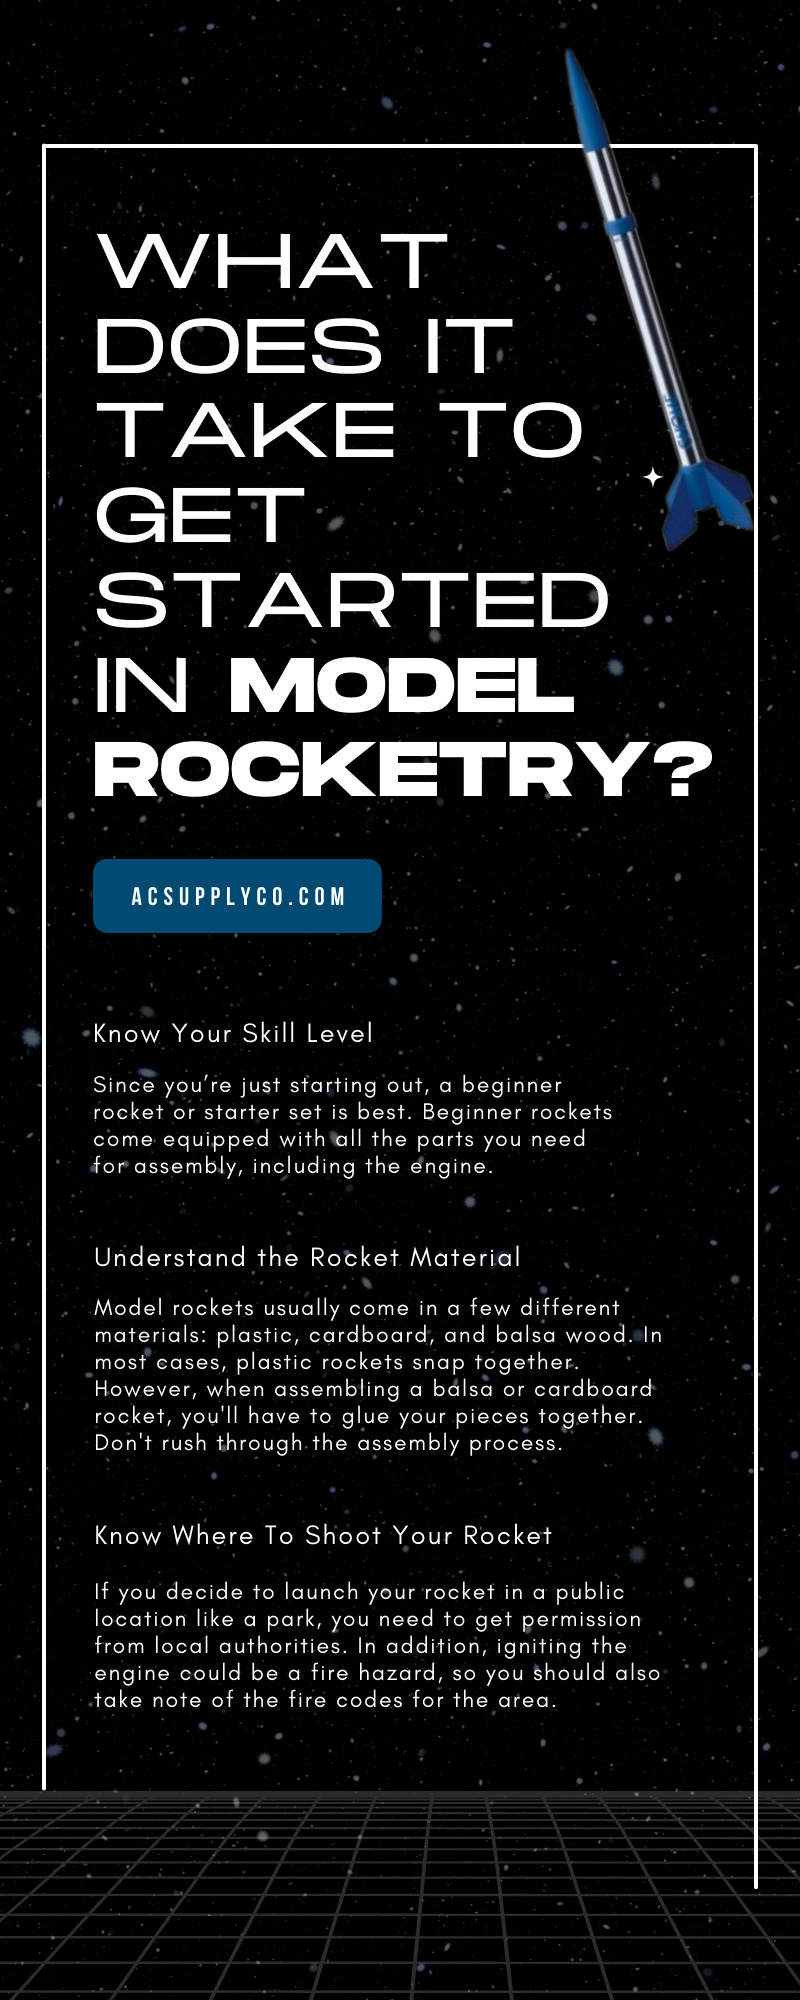 What Does It Take To Get Started in Model Rocketry?